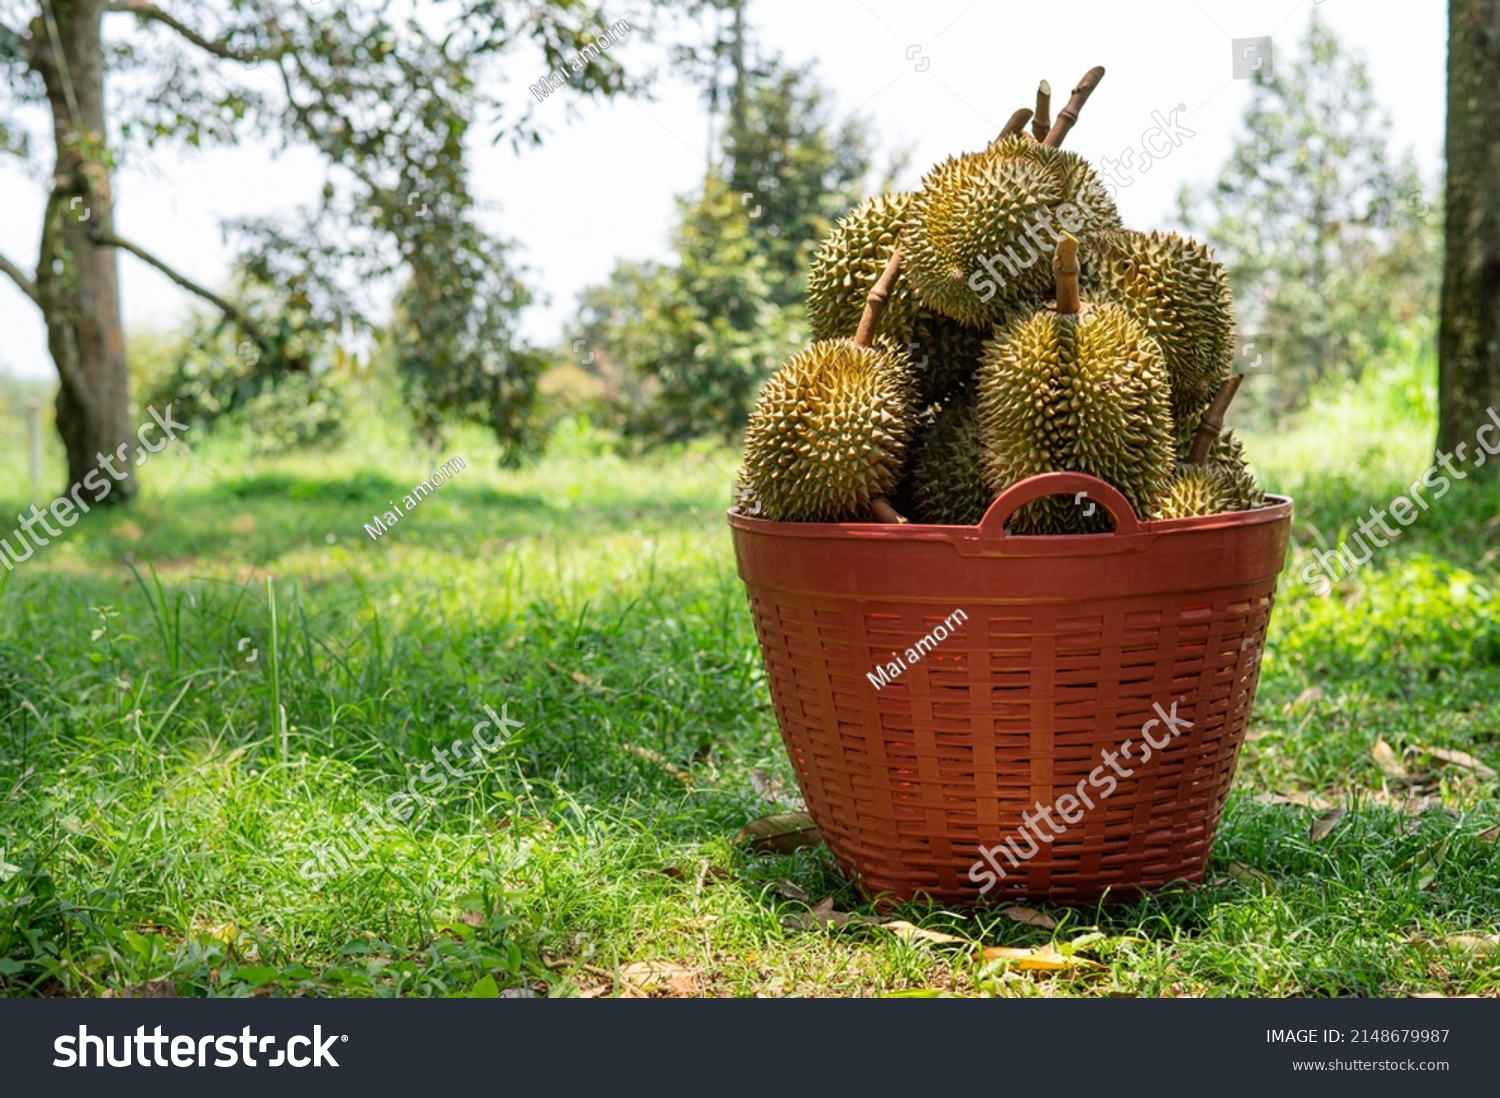 The harvested durians are cut and put in the red basket in the garden, product quality for export, king of fruit in Thailand, for advertising concept  #2148679987